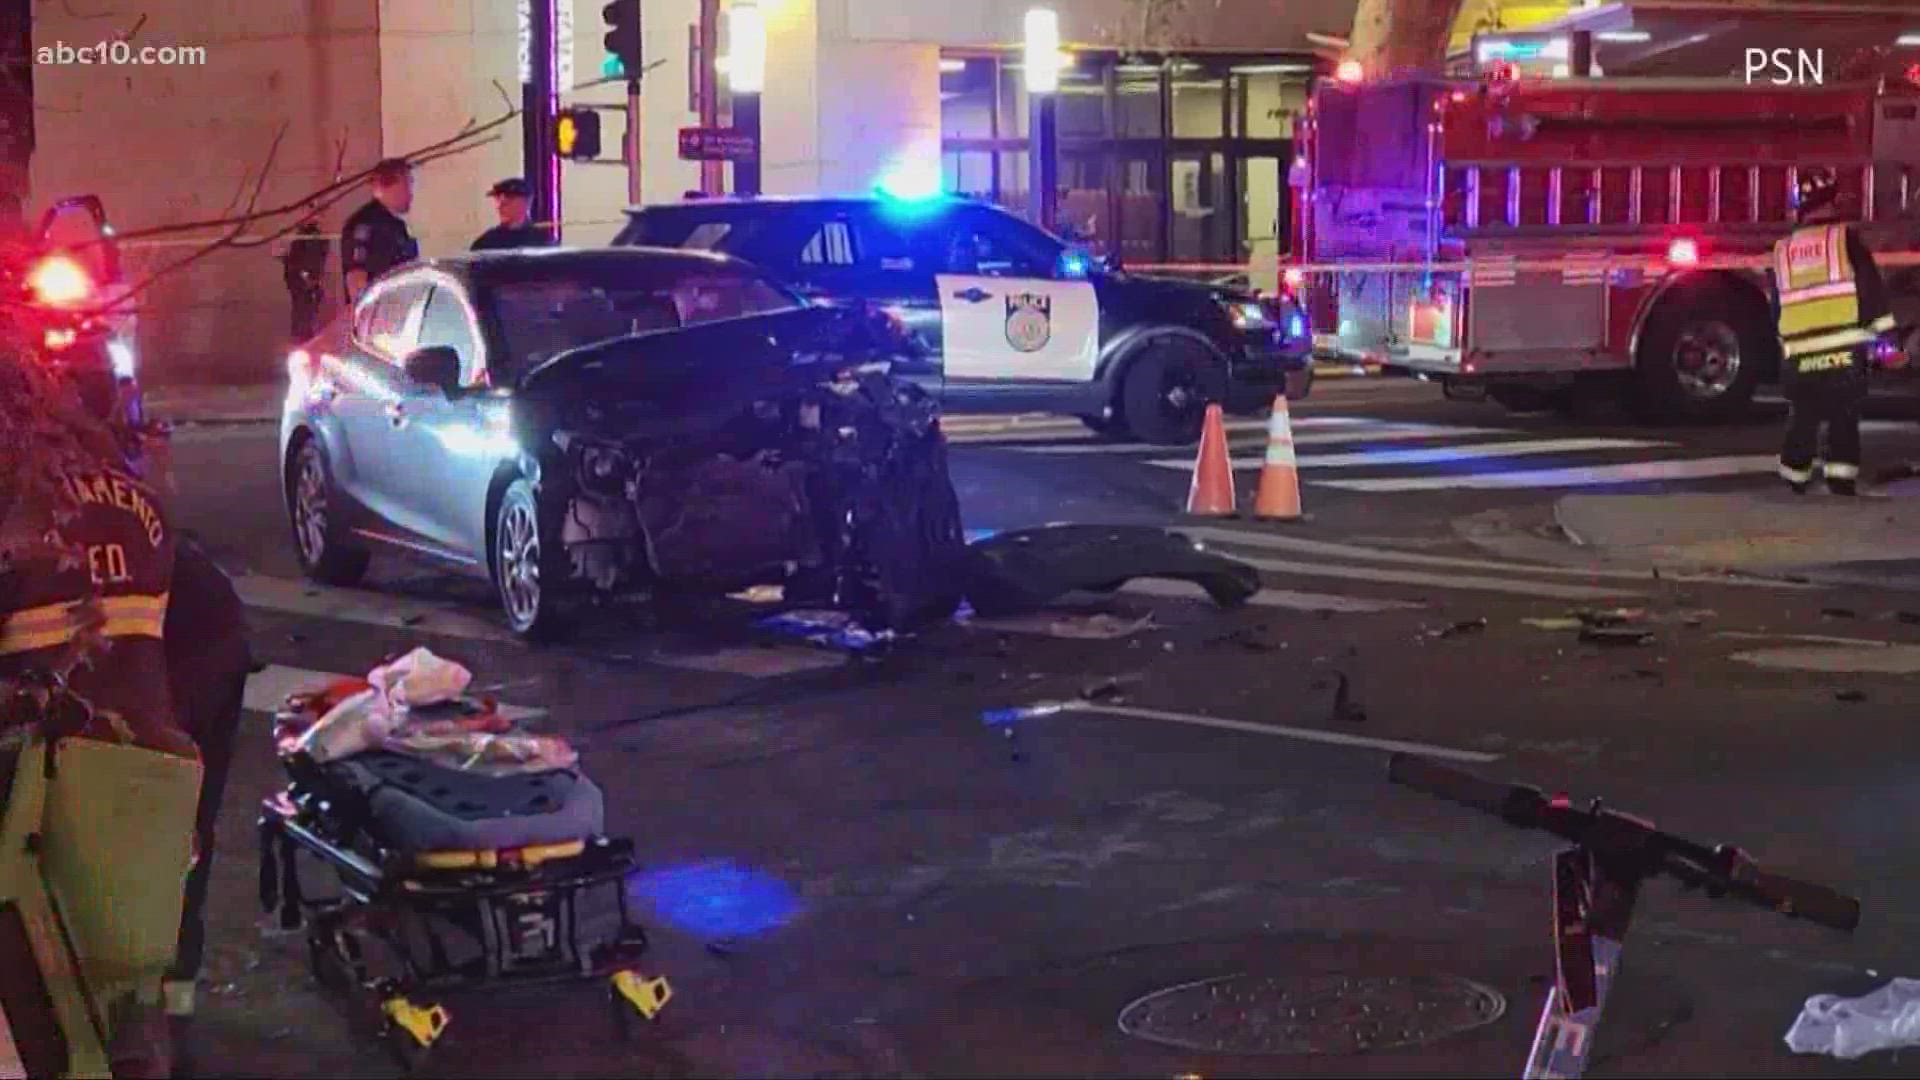 With one incident leaving a woman dead on J Street, the Halloween weekend saw a string of deadly car crashes. Police are looking for a blue Dodge Ram pick-up truck